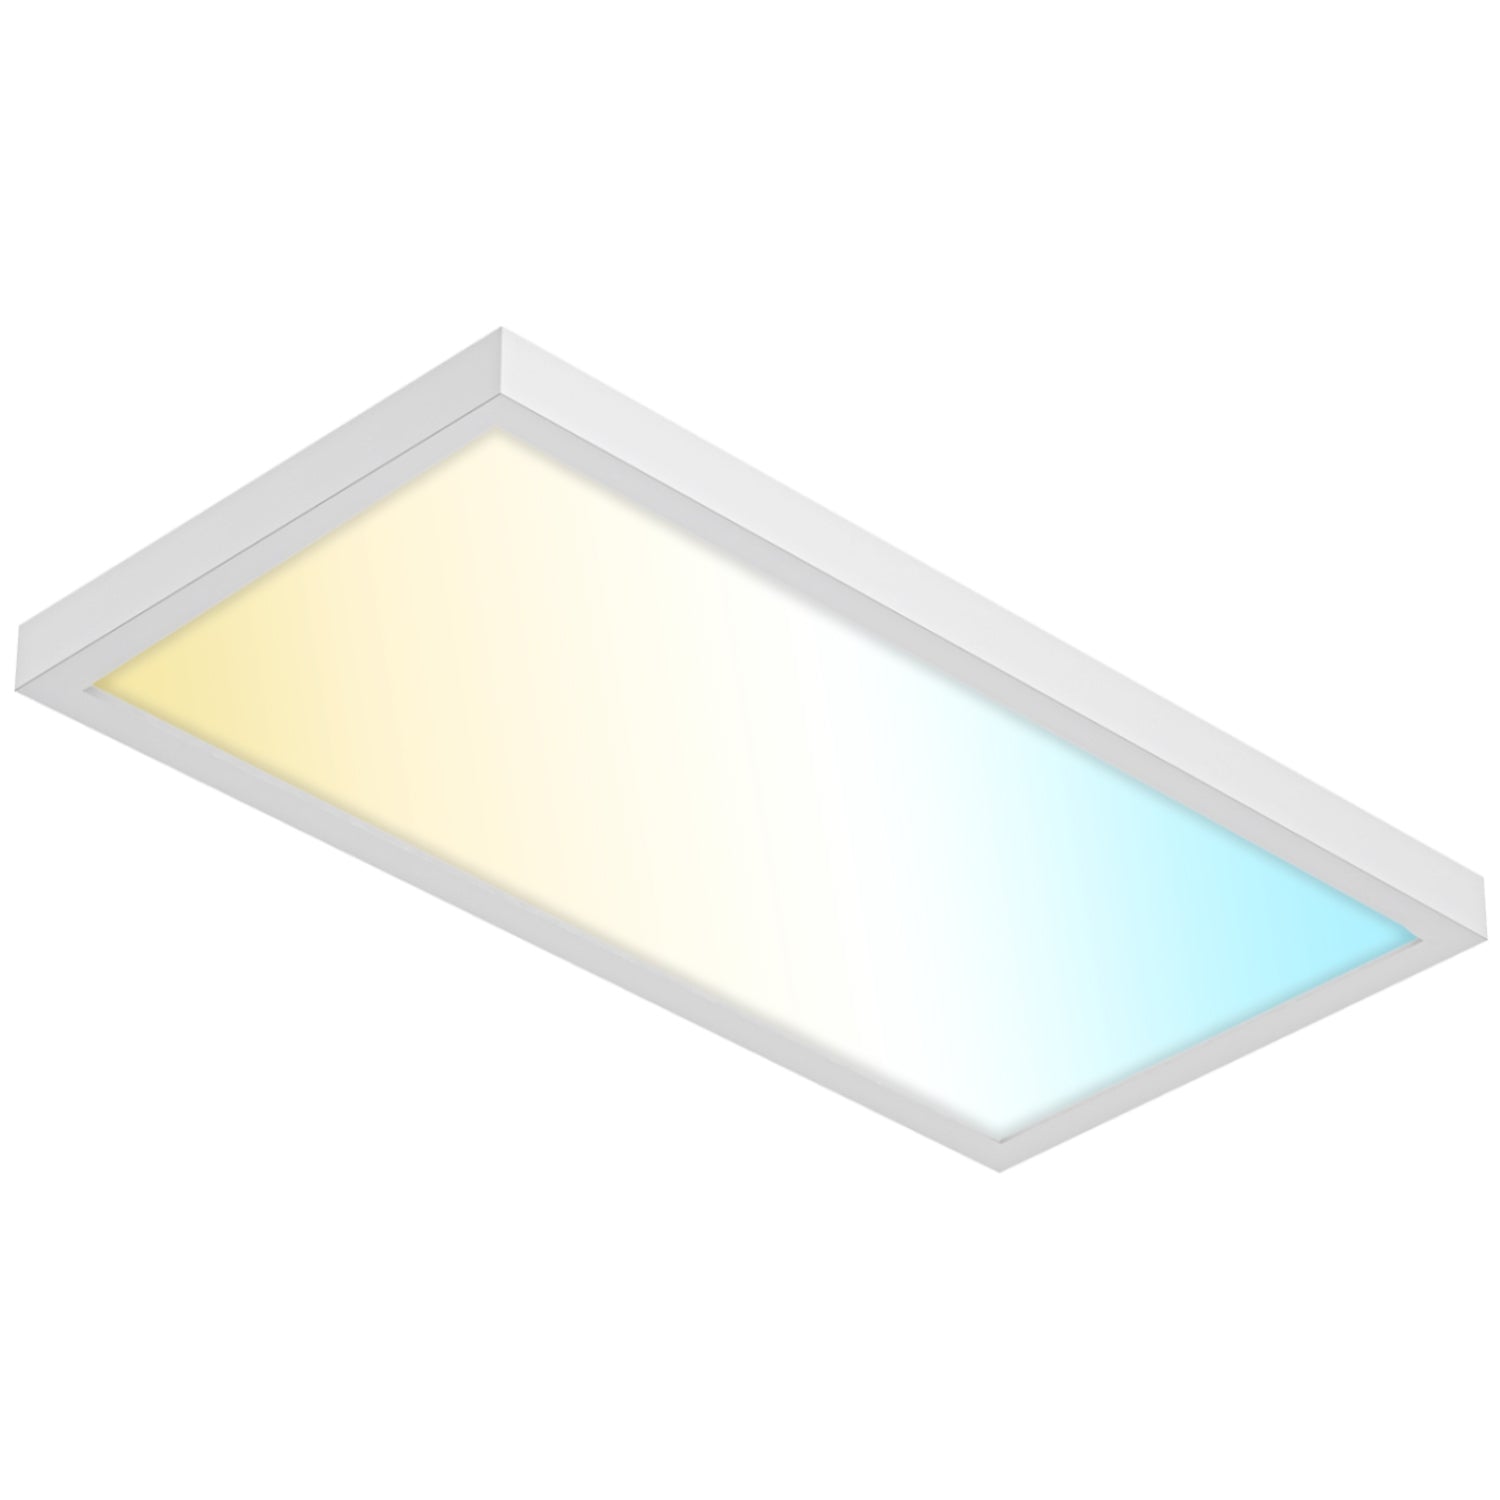 LED Ceiling Panel Light, 16W/18W/20W, 1x2, Selectable CCT, 2000 Lumens